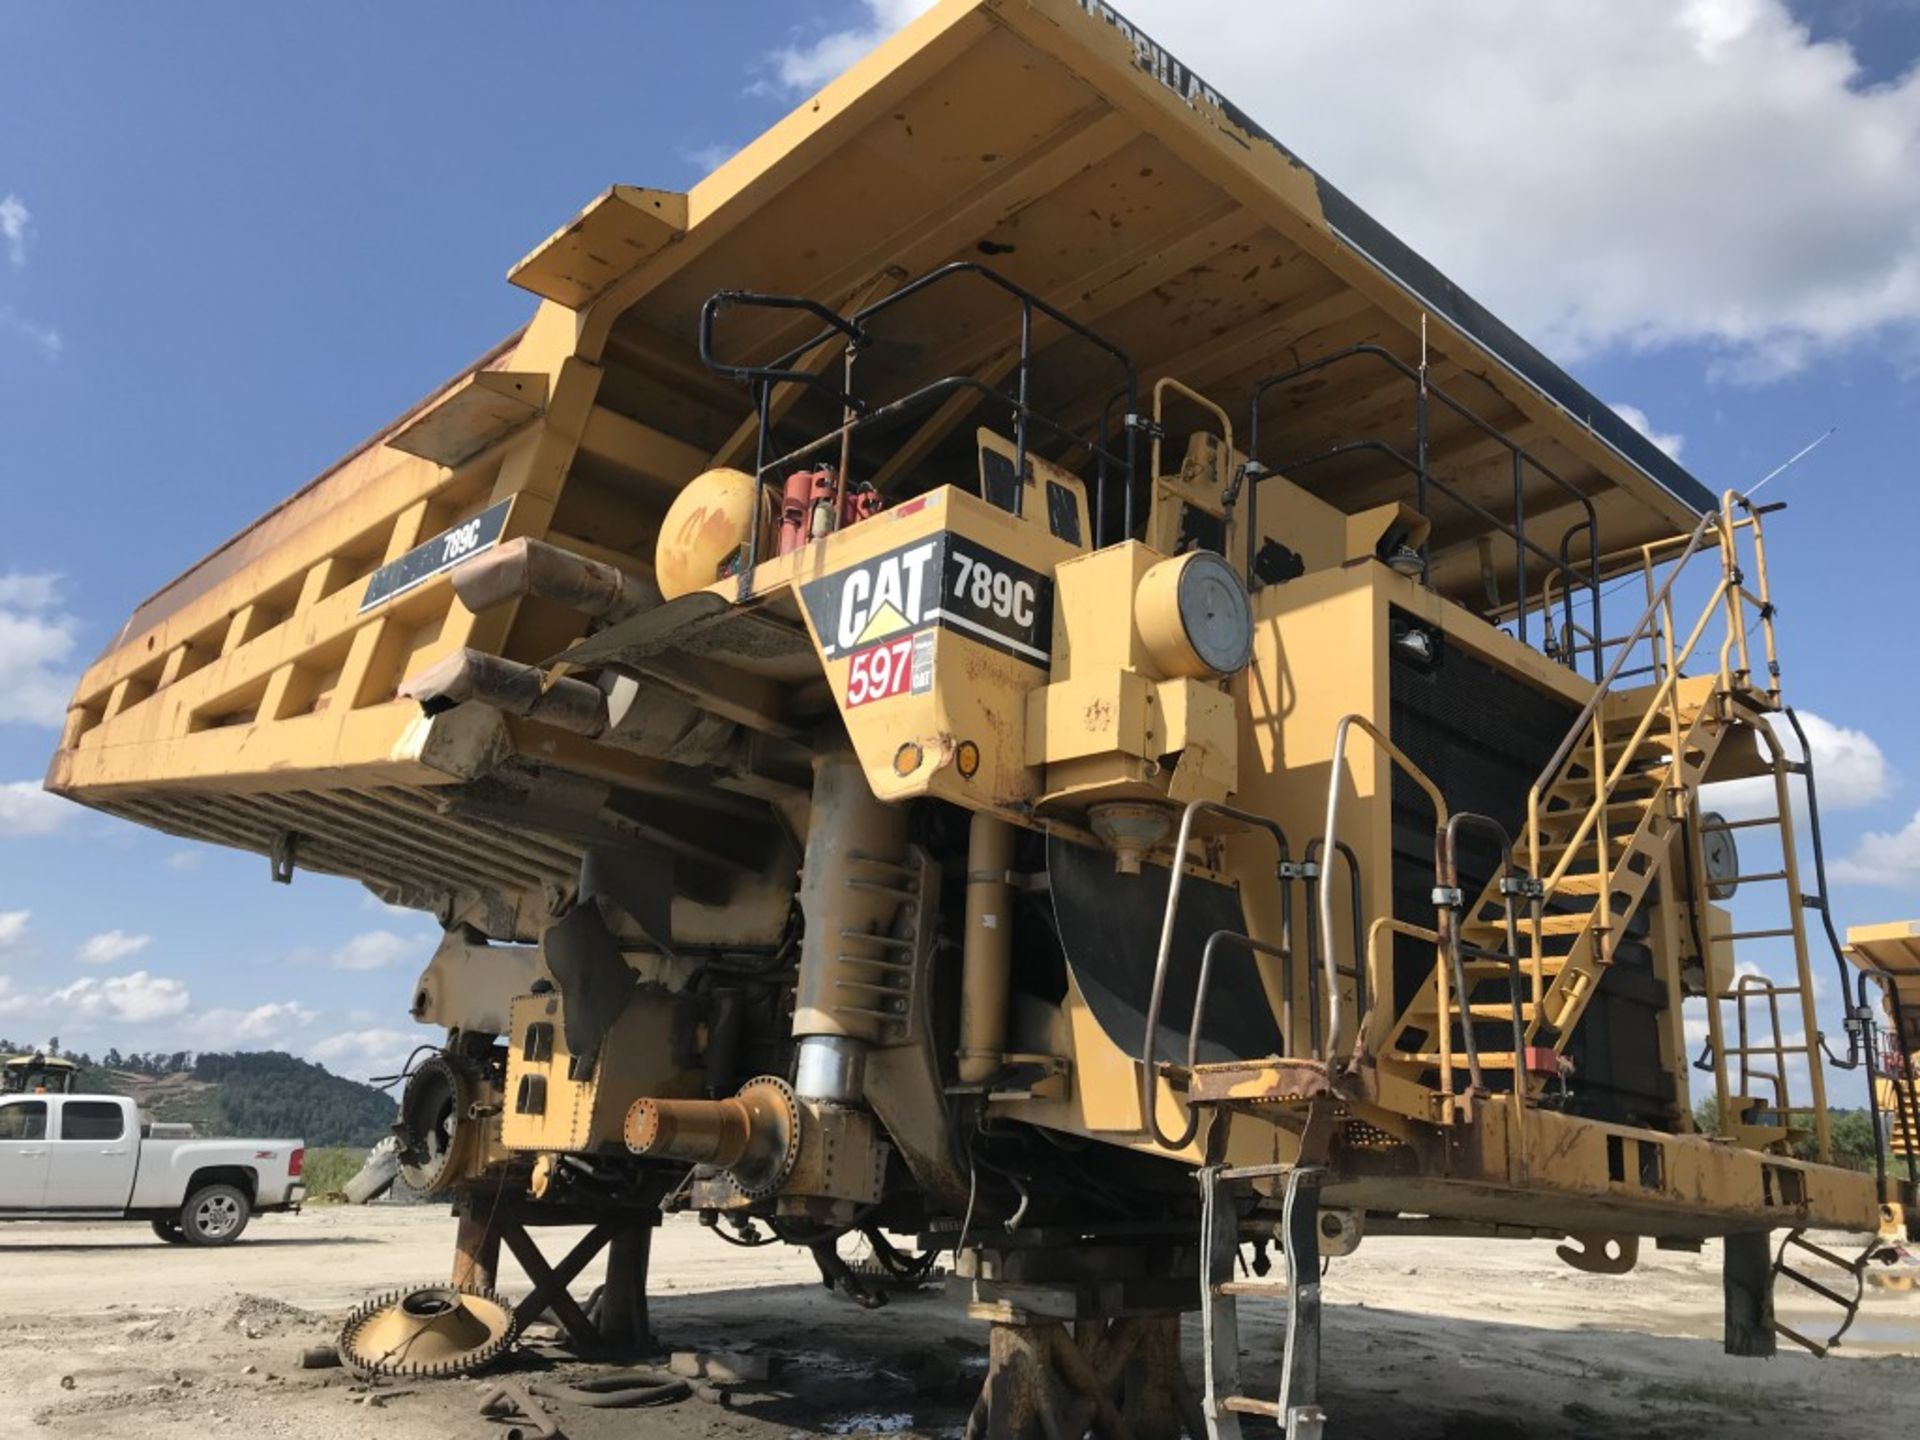 CAT 789C OFF-ROAD DUMP TRUCK FOR PARTS, S/N: CAT0789CC2BW00597, CAT V-12 DIESEL ENGINE, MISSING A